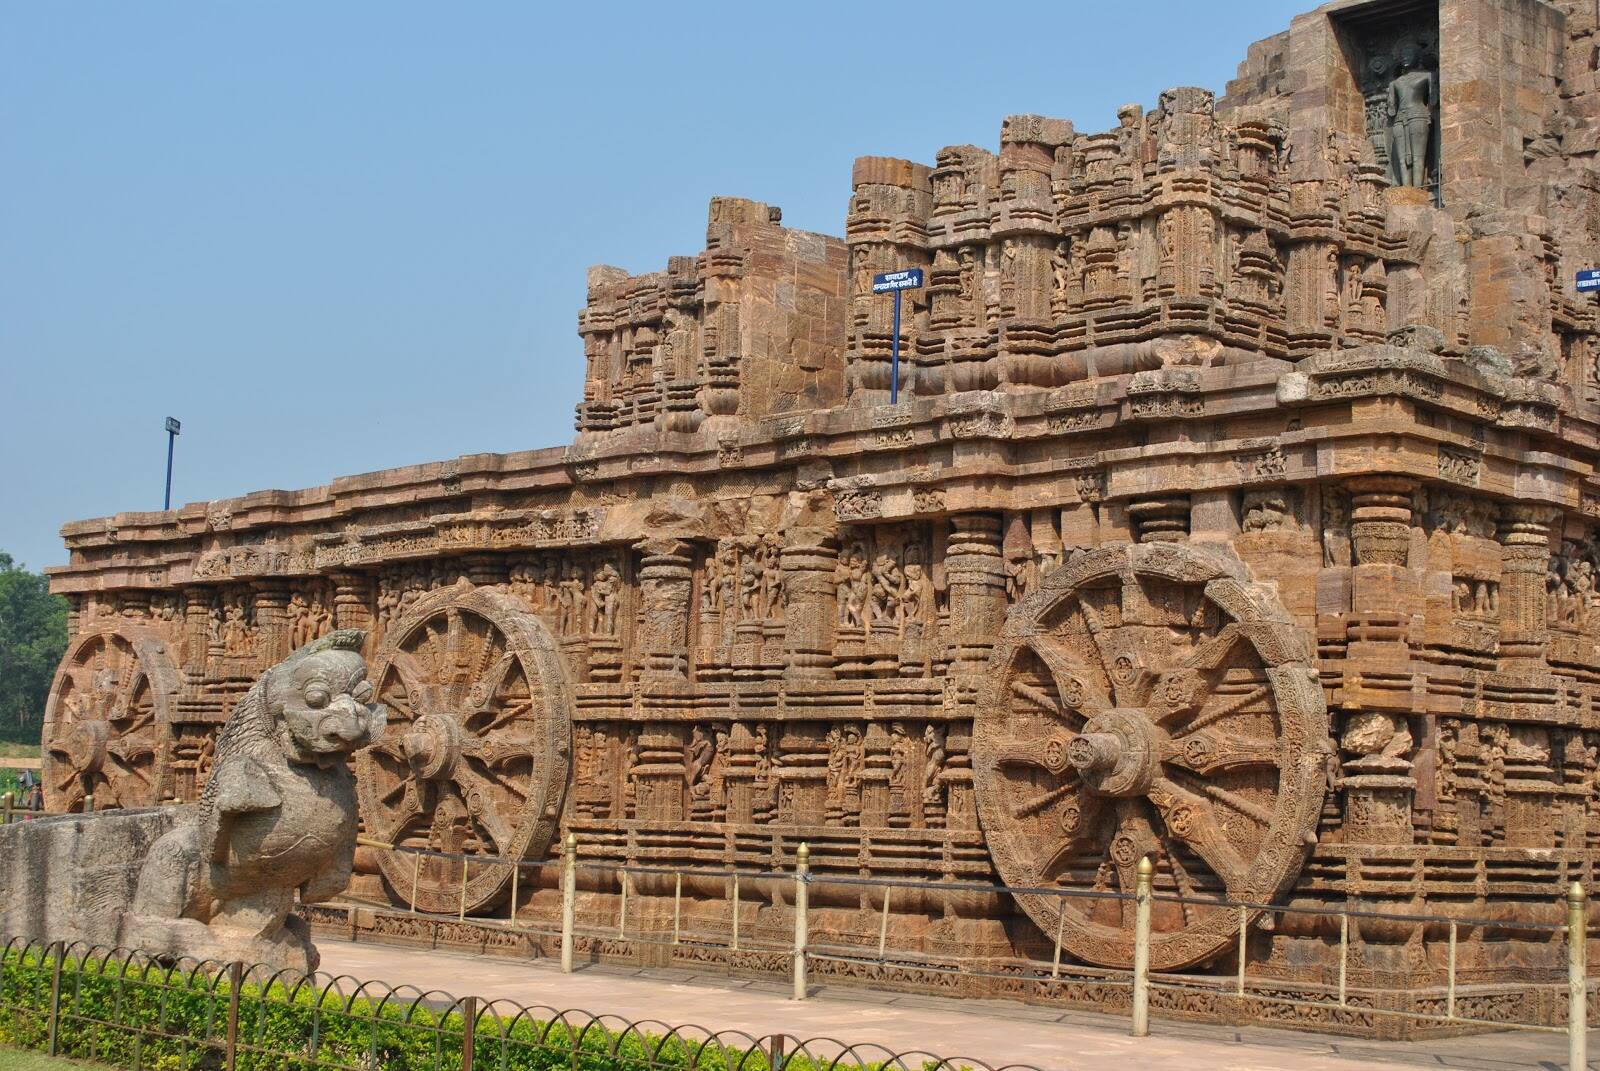 these are the famous surya temples in india